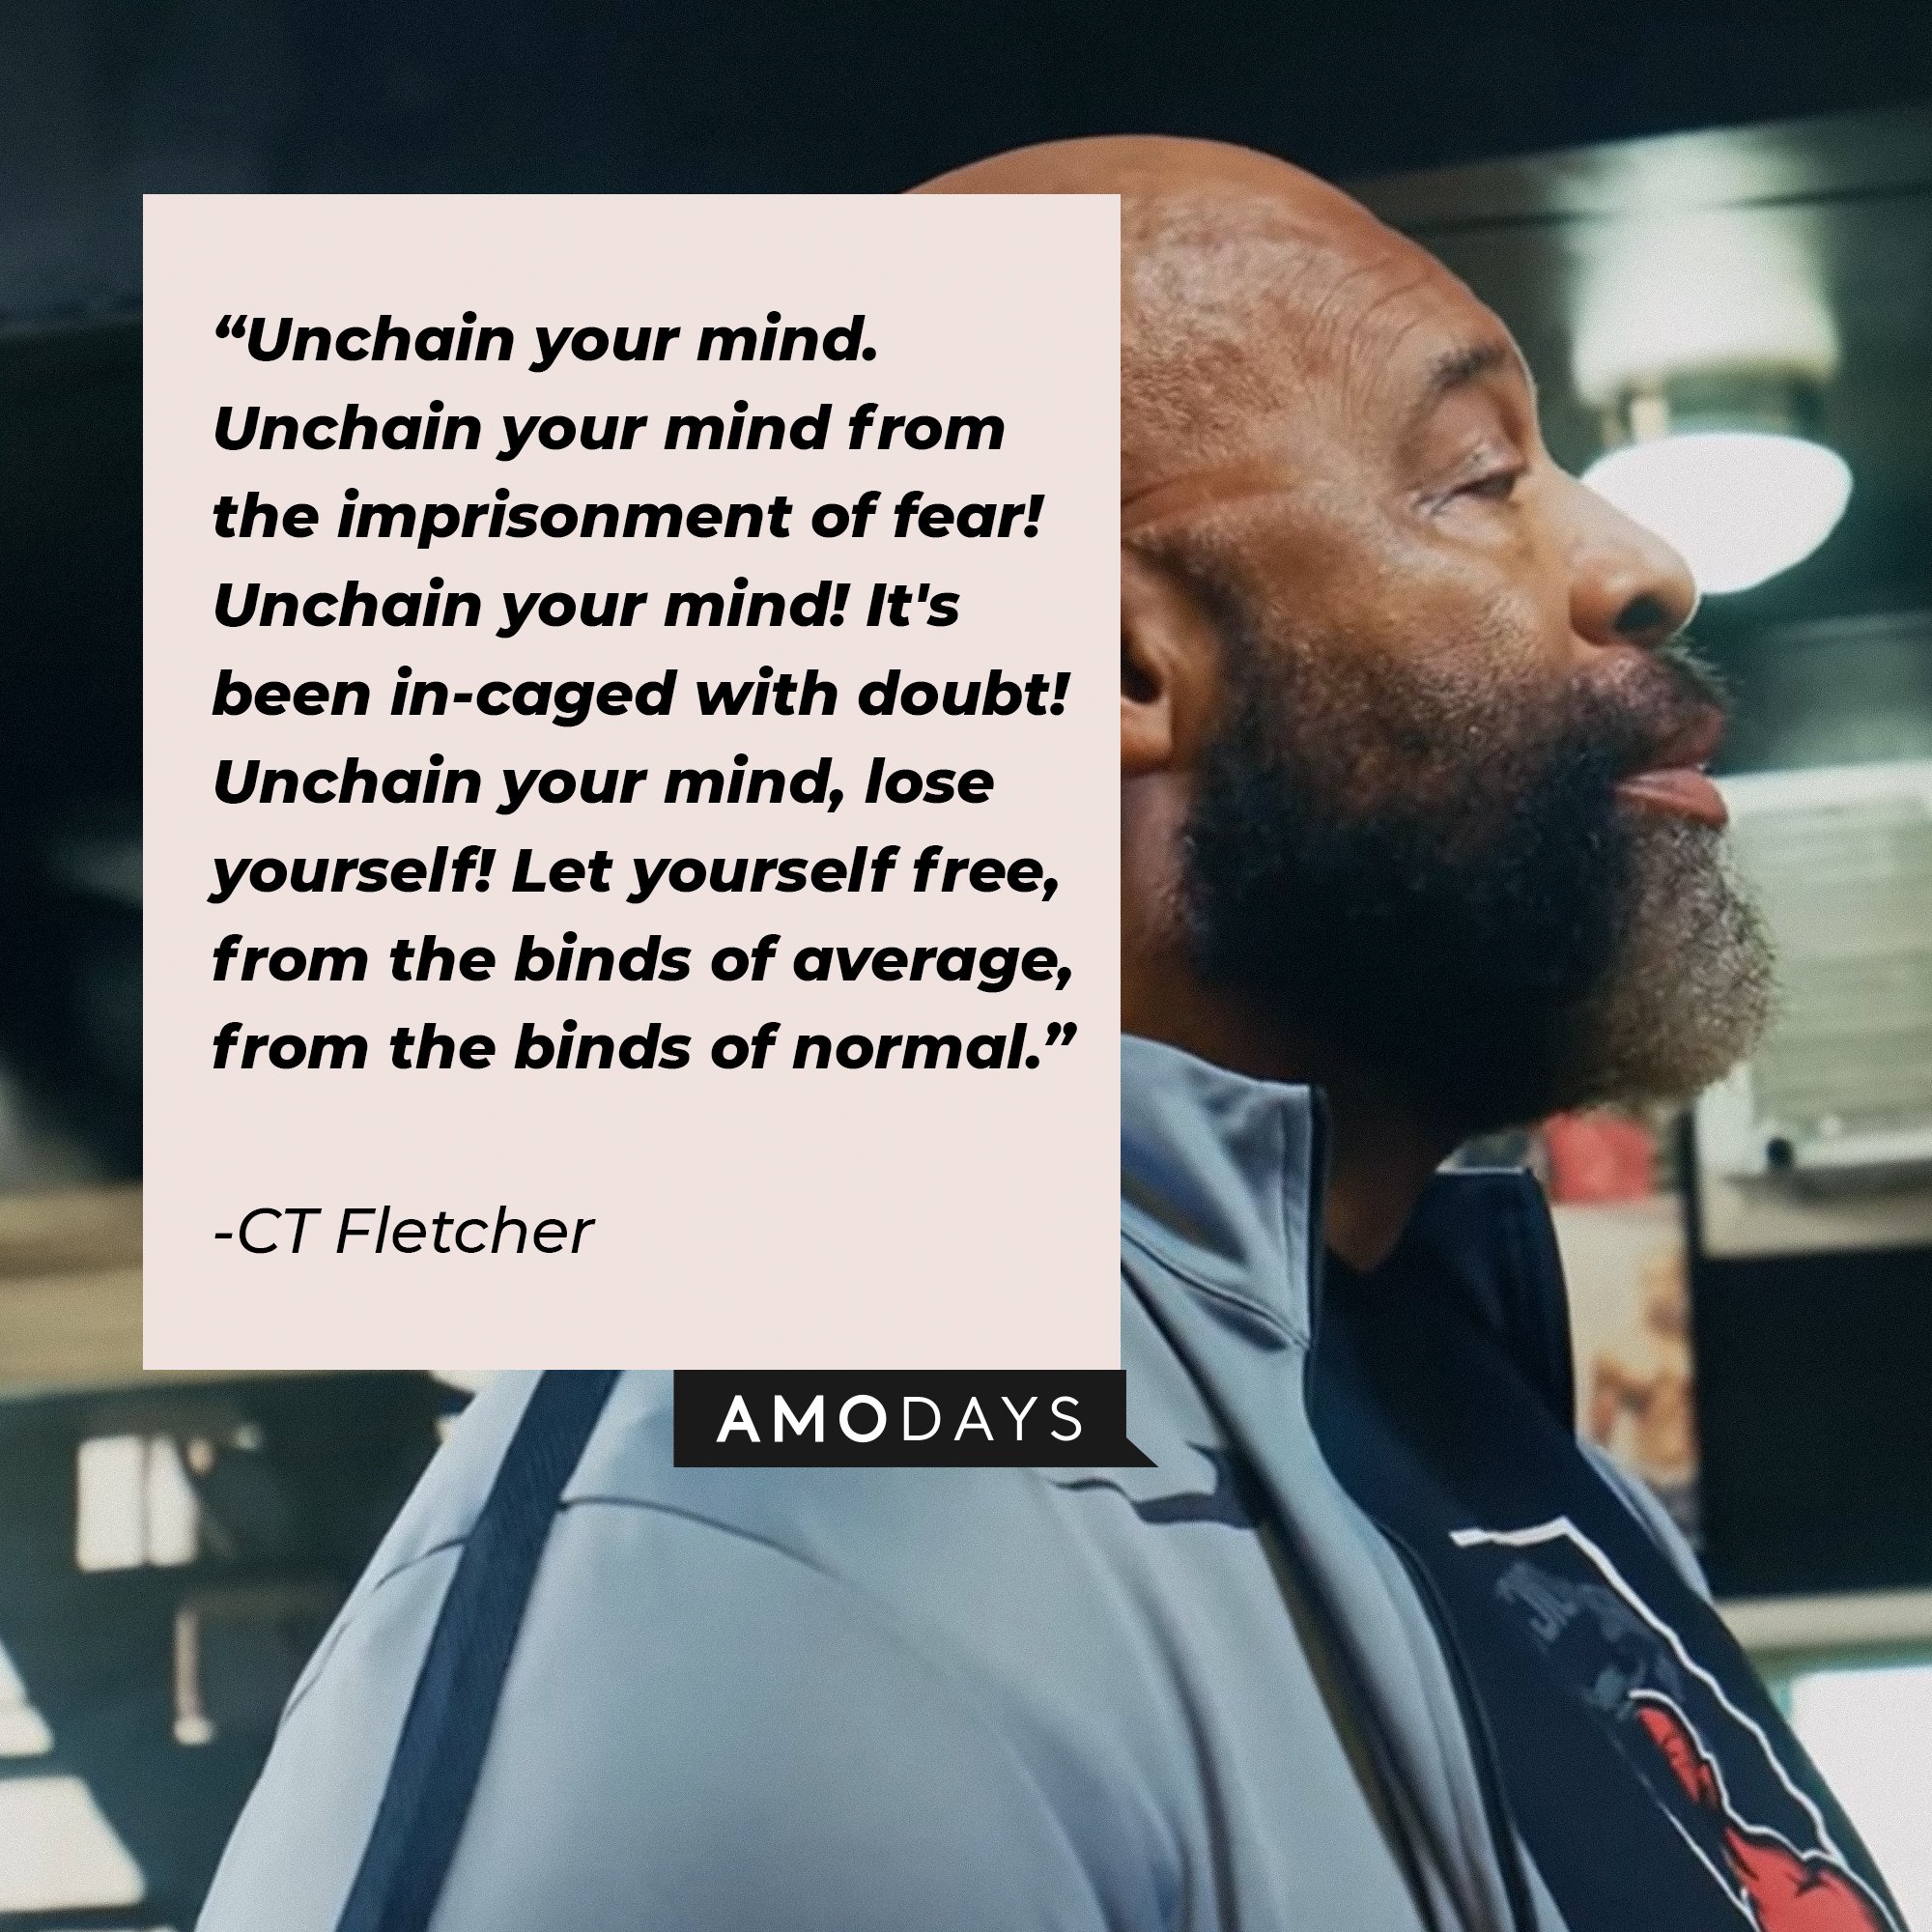 CT Fletcher's quote:\\\\\\\\u00a0"Unchain your mind. Unchain your mind from the imprisonment of fear! Unchain your mind! It's been in-caged with doubt! Unchain your mind, lose yourself! Let yourself free, from the binds of average, from the binds of normal."\\\\\\\\u00a0| Image: AmoDays